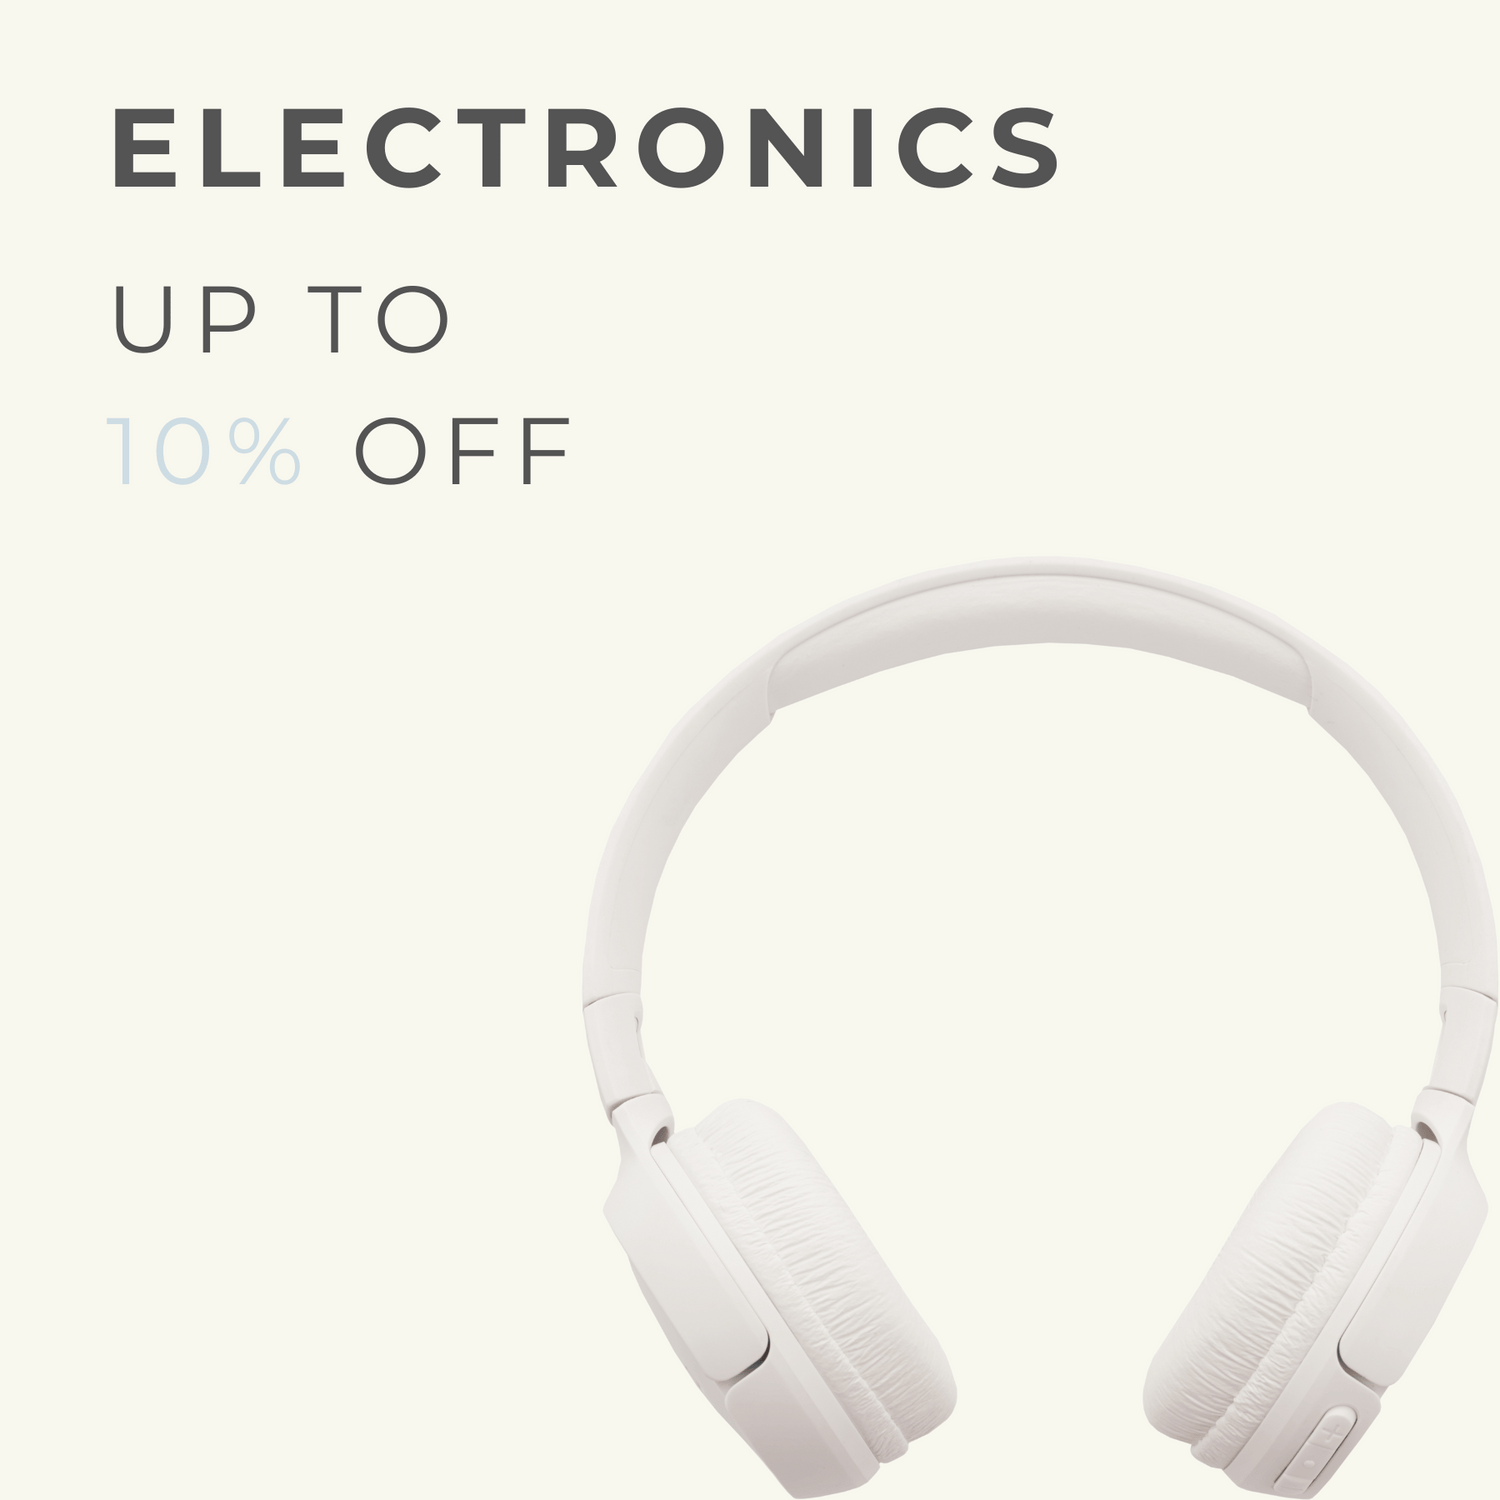 Sleek white wireless headphones against a minimalist background with text stating 'ELECTRONICS UP TO 10% OFF', highlighting a discount on electronic devices.